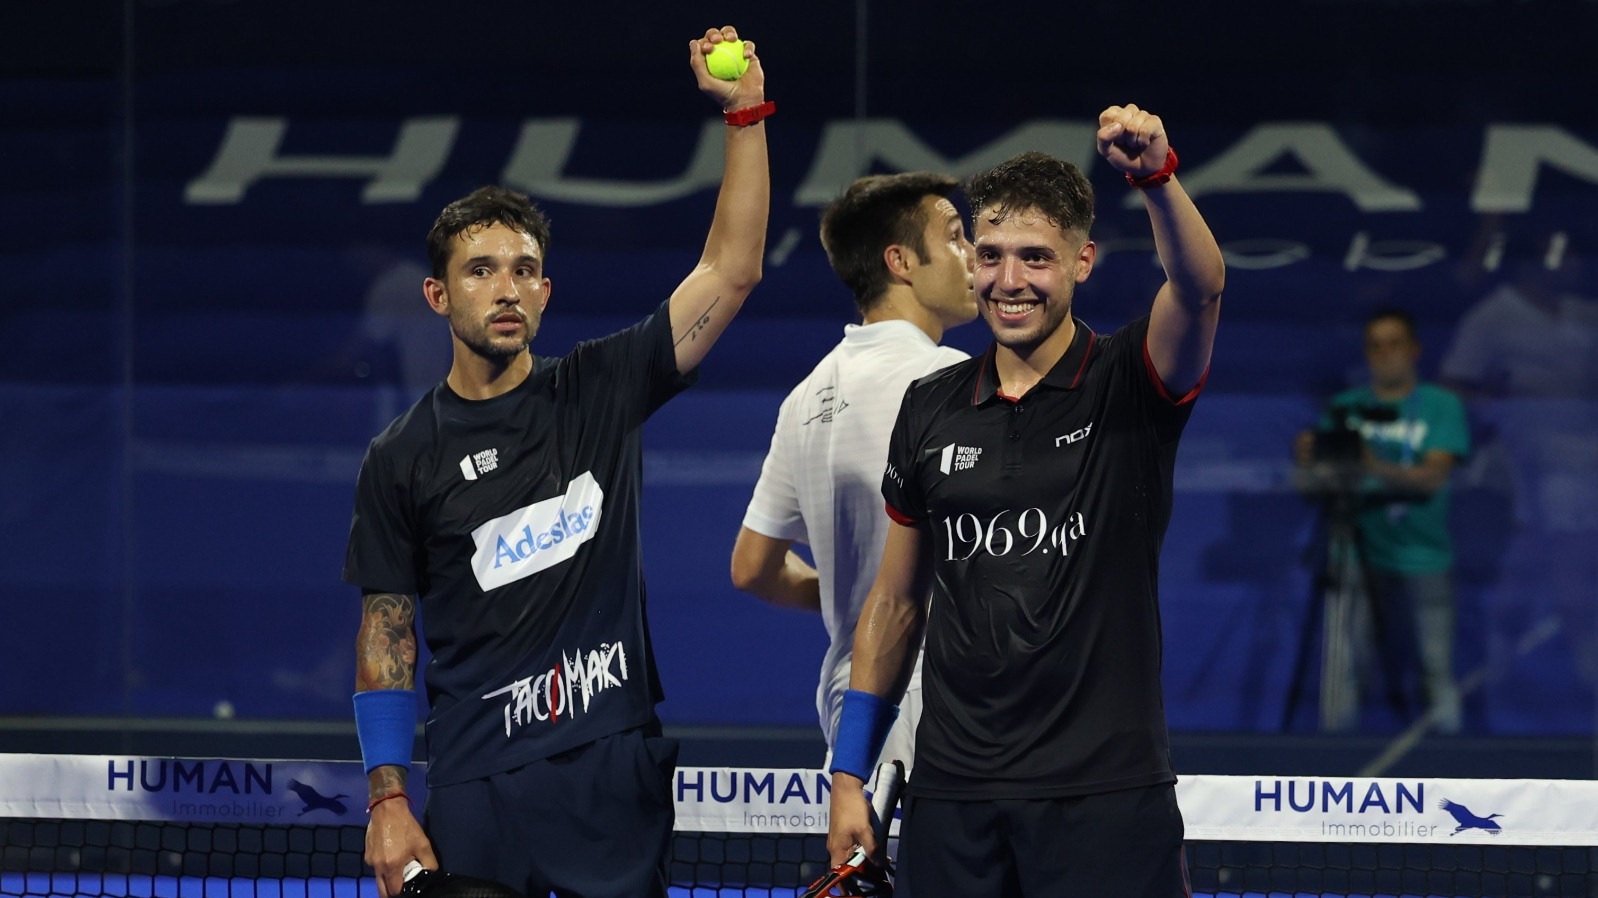 Agustin Tapia and Sanyo Gutiérrez present at the Premier Padel from Madrid?